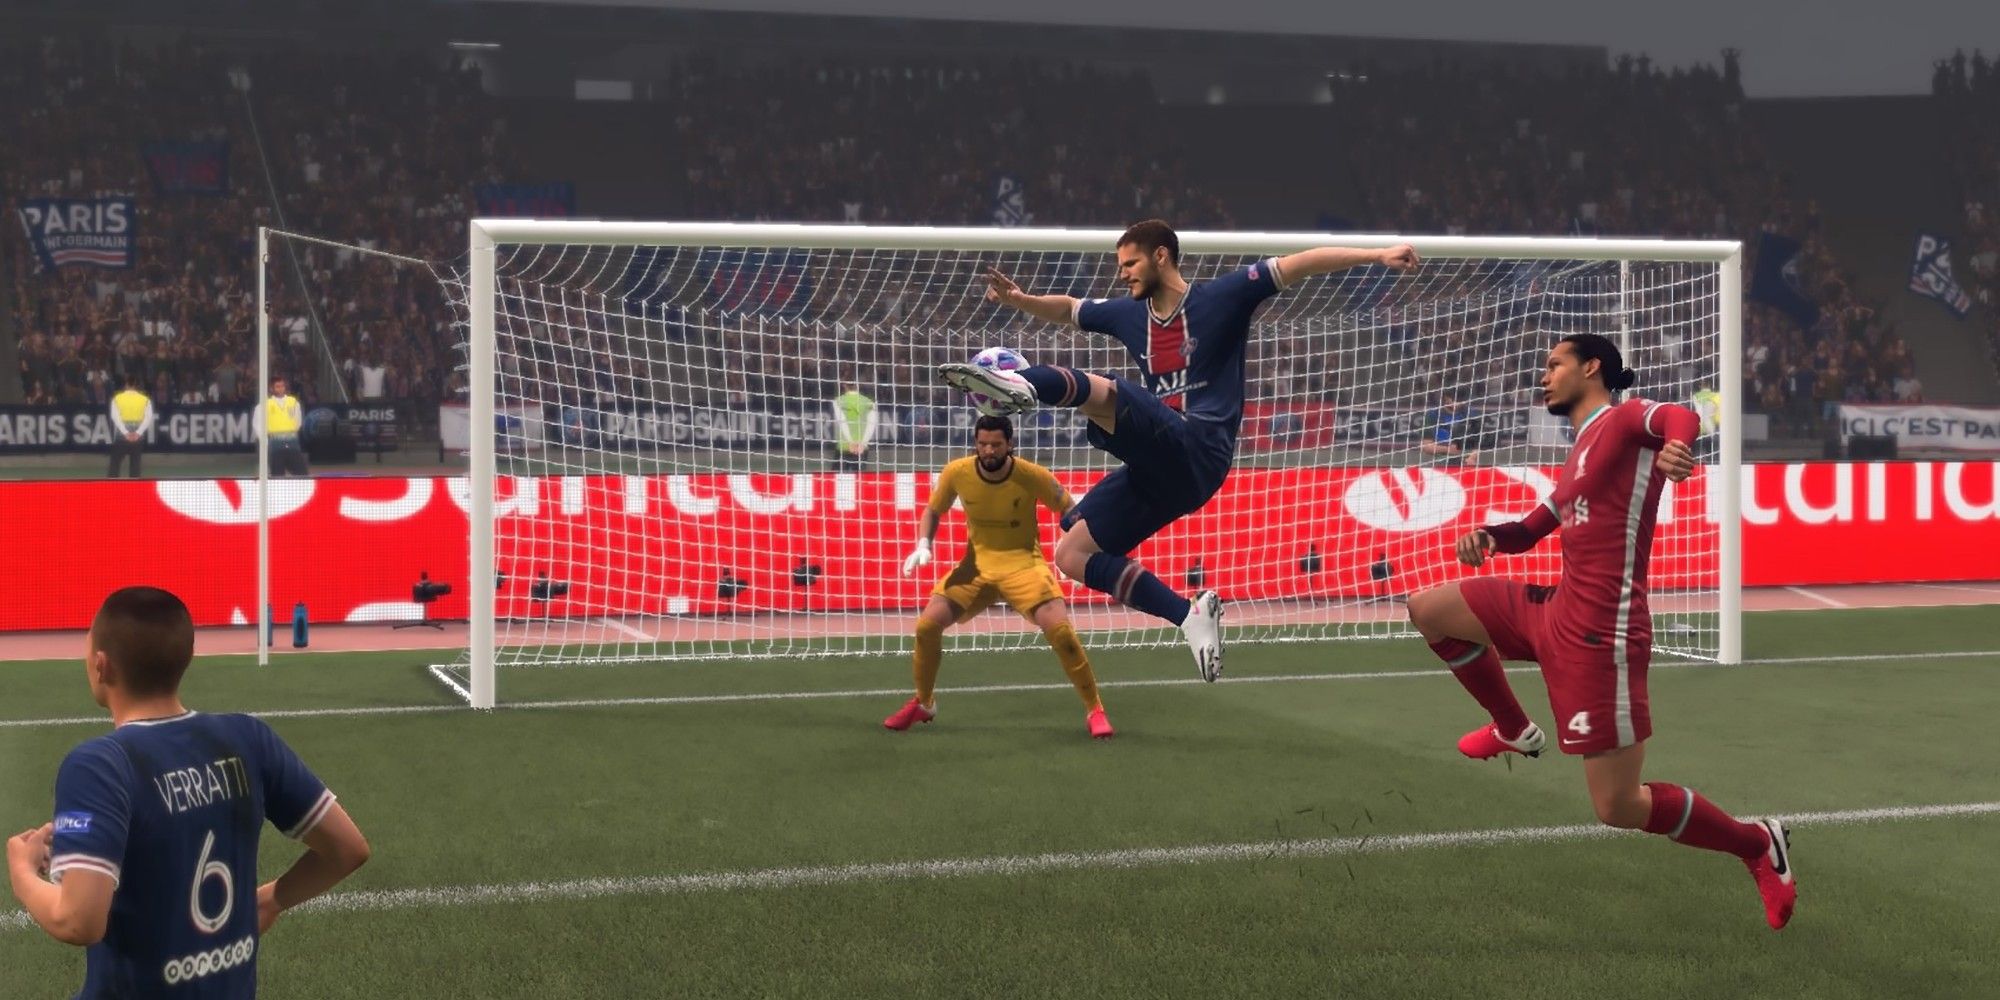 FIFA 21 tips guide: How to become a better player